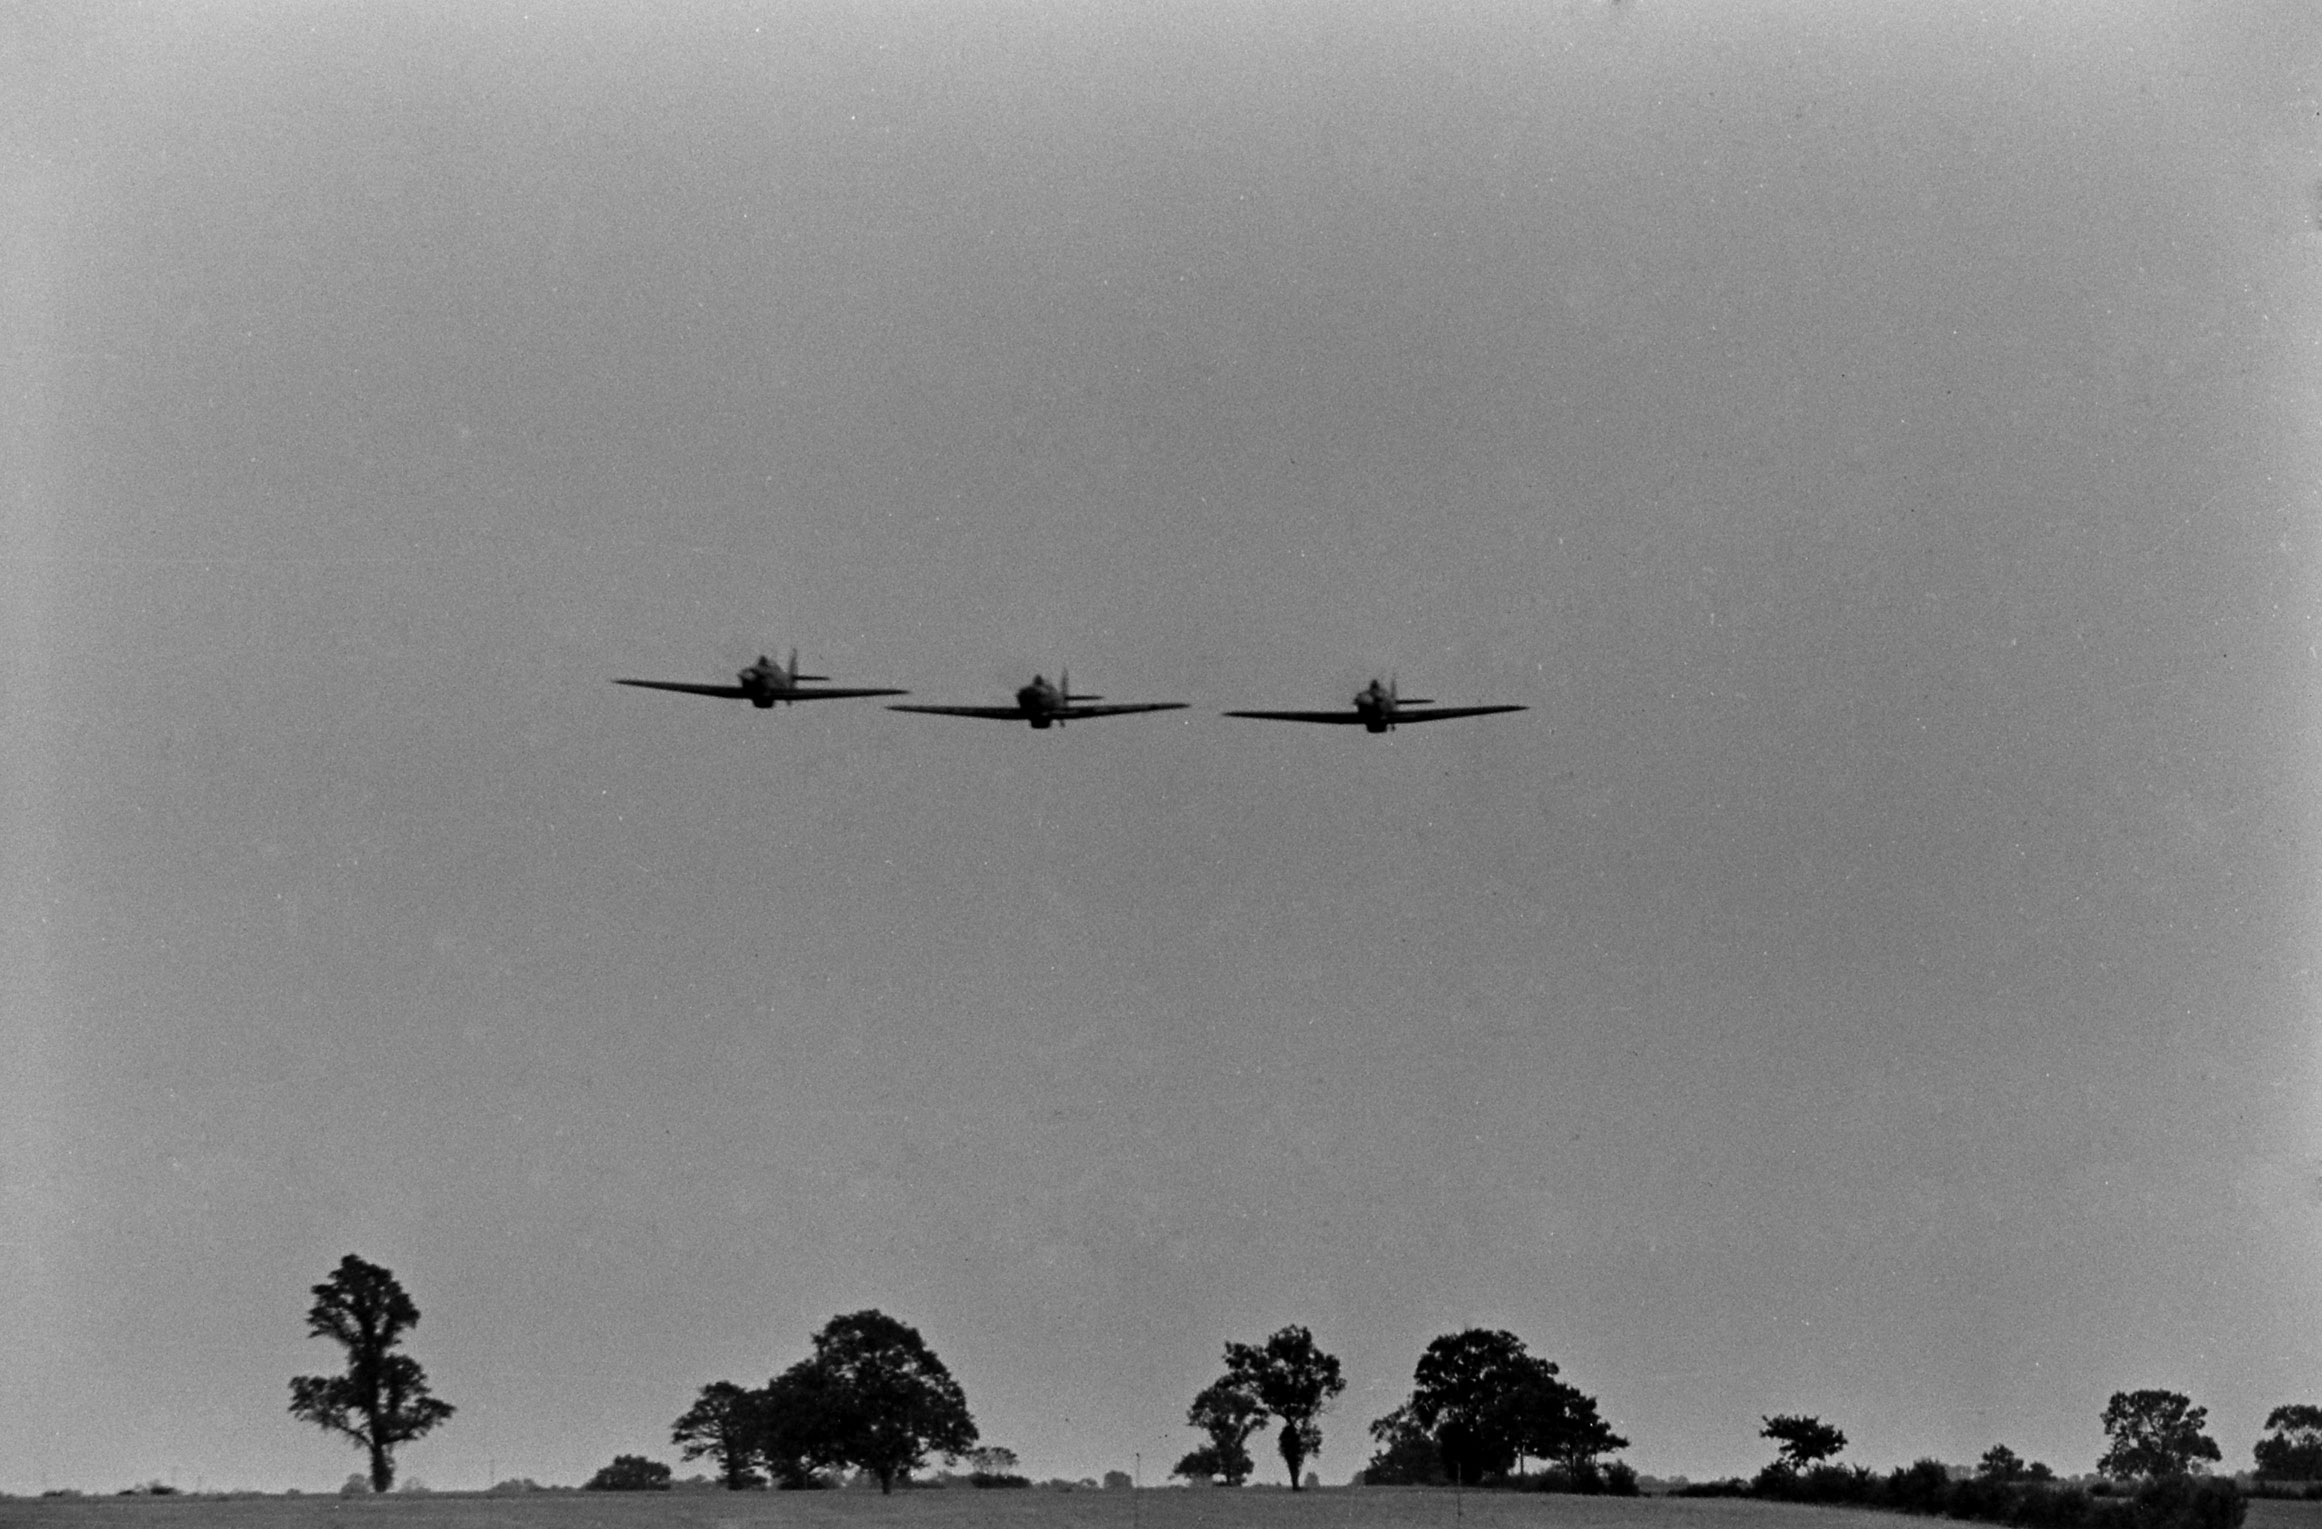 Scene during the Battle of Britain, RAF Fighter Command airfield, 1940.